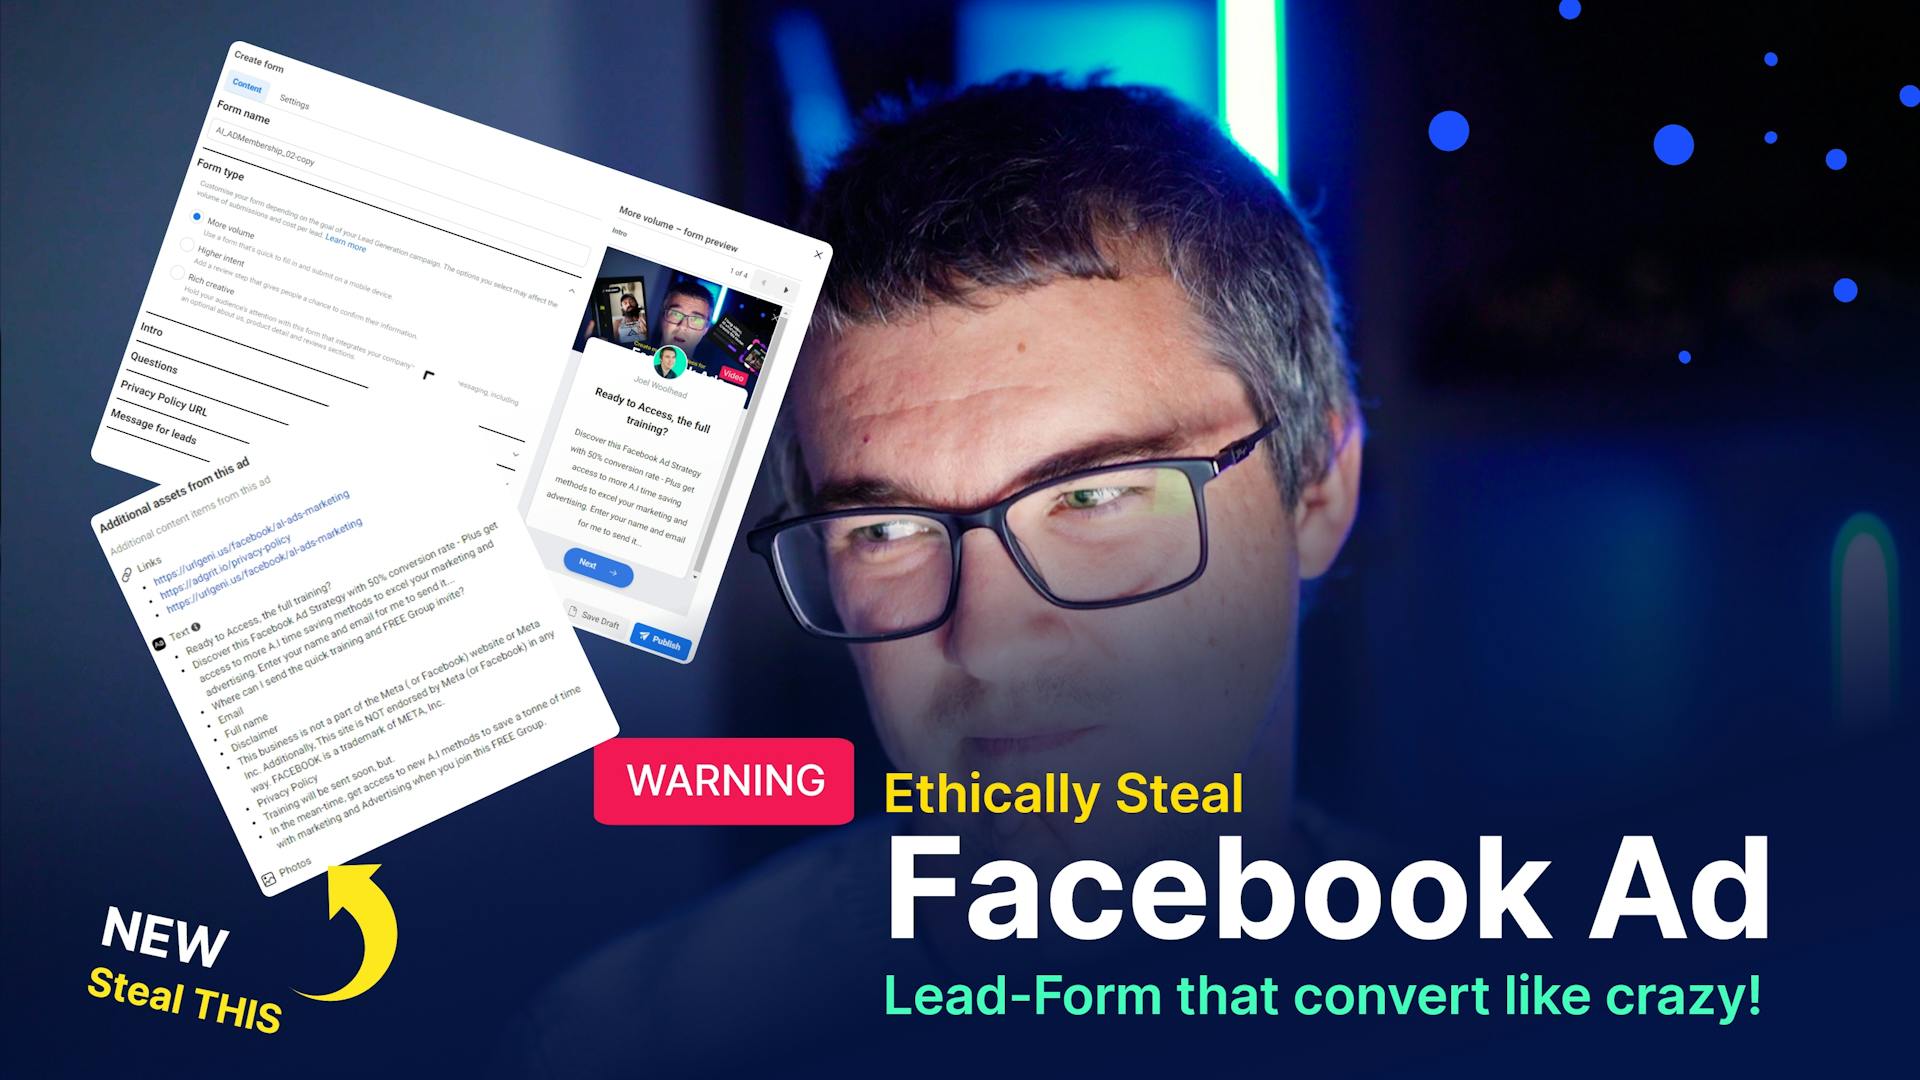 Facebook Ad Lead Form ethically stolen without seeing the Lead-form ad in my feed...